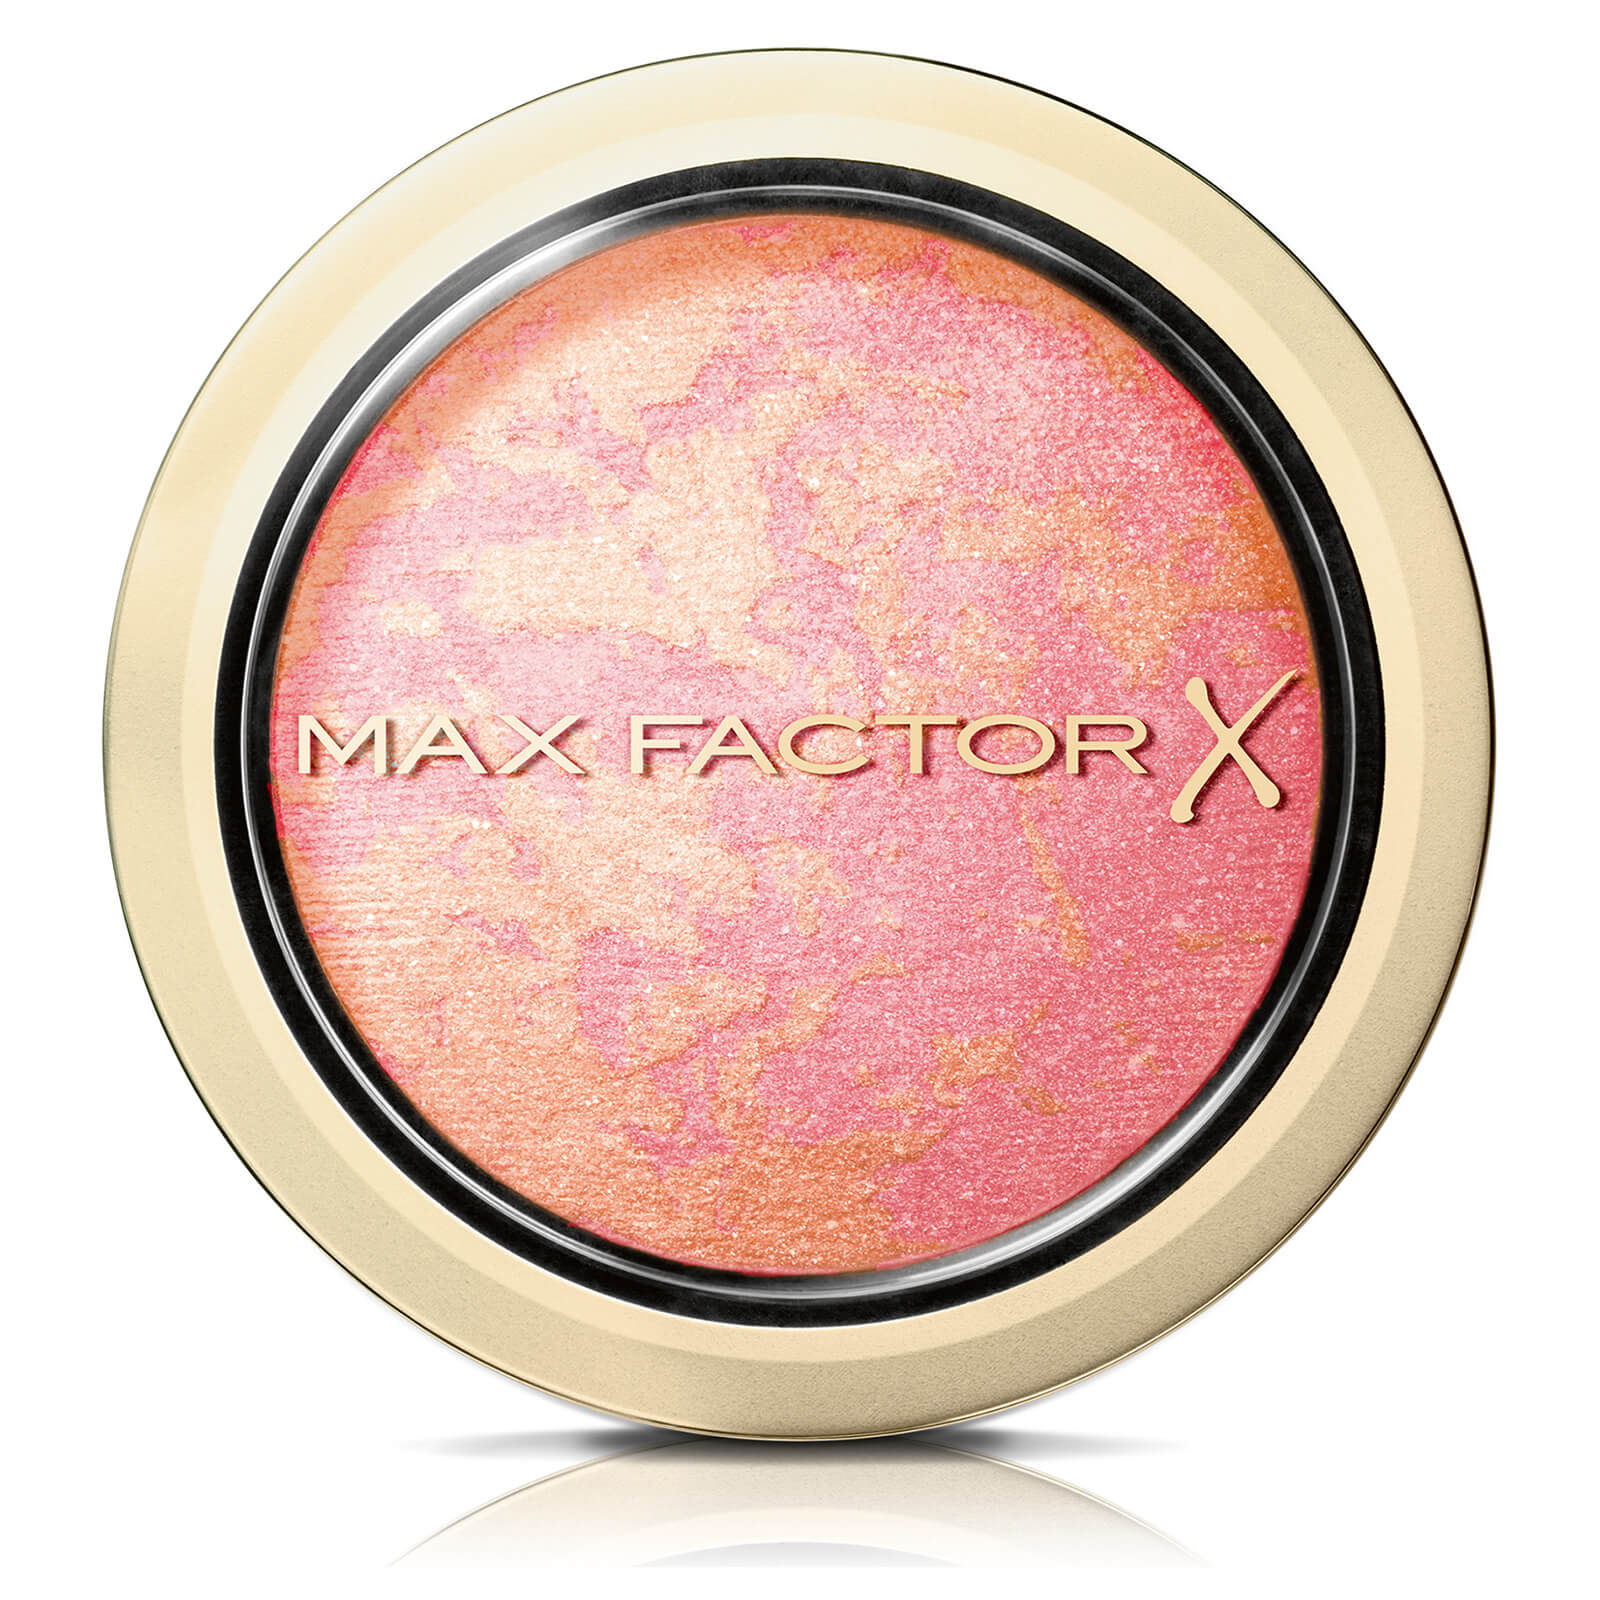 Image of Max Factor Crème Puff blush - Lovely Pink